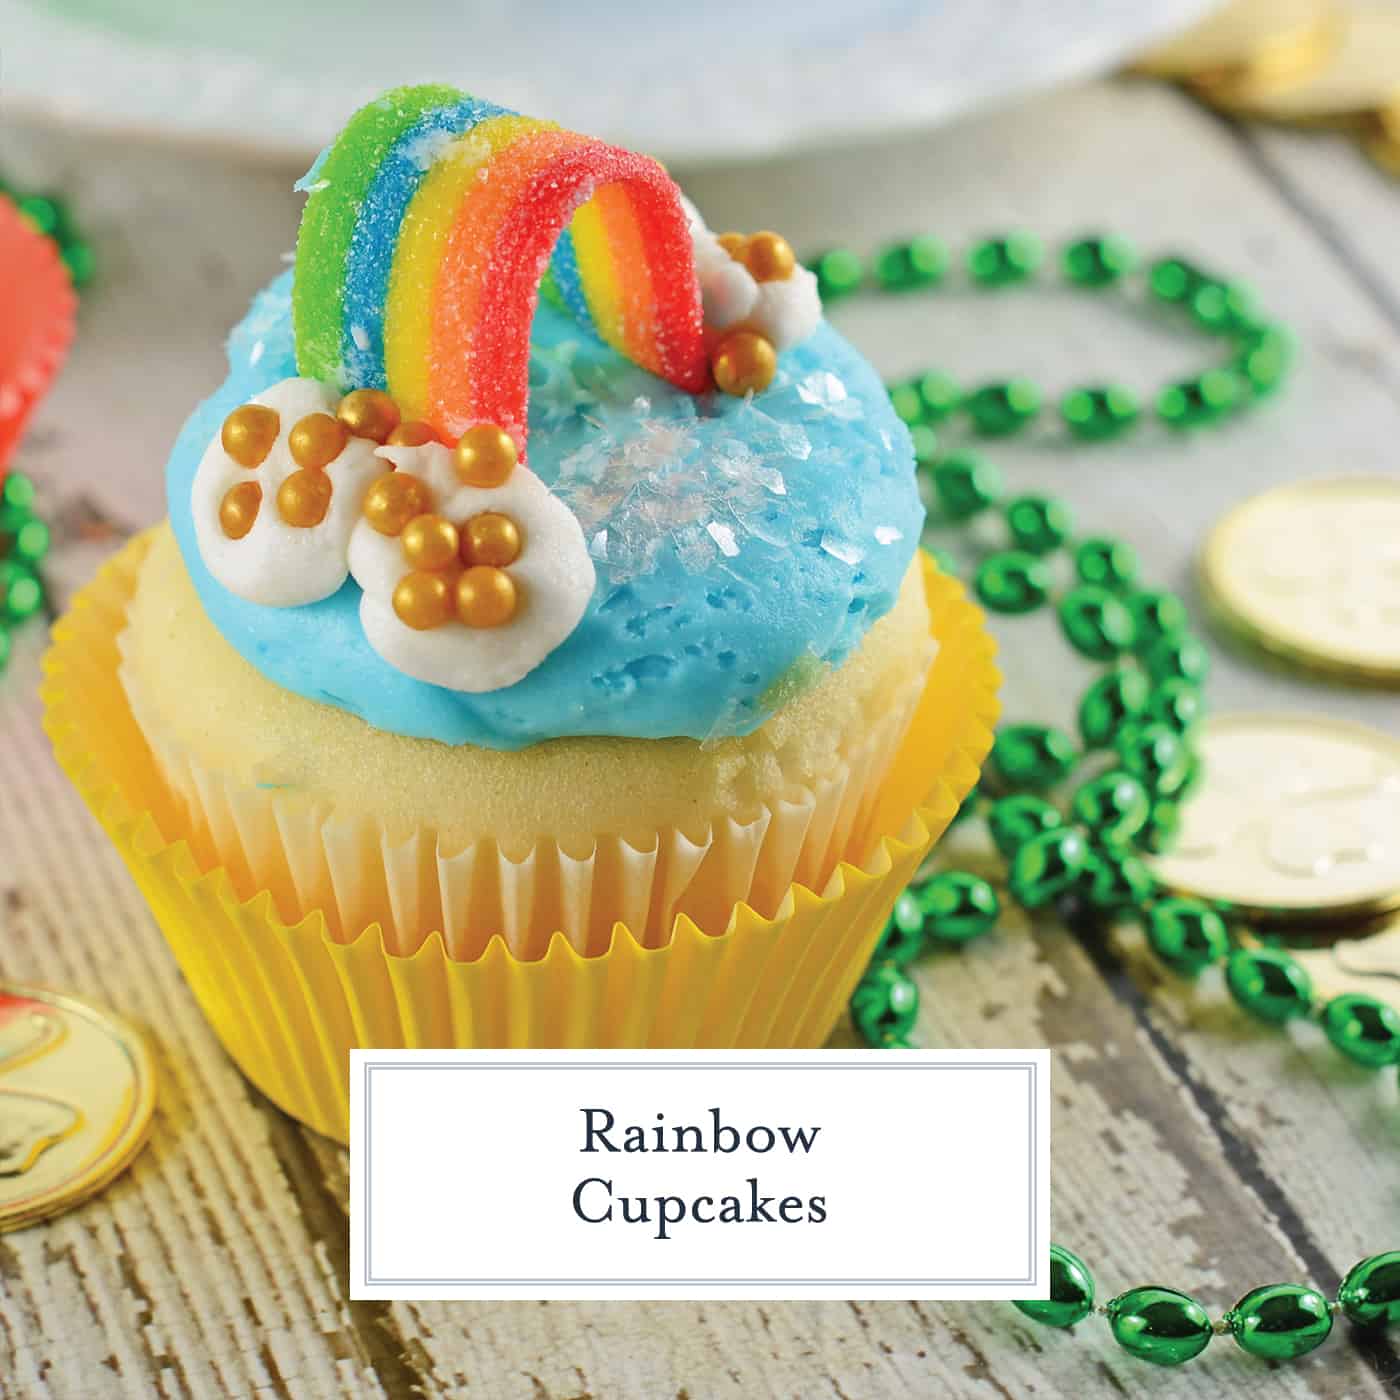 Rainbow Cupcakes are super easy and cute. The perfect cupcake for St. Patrick's Day, children's birthday parties or any random day of the week! #rainbowcupcakes #stapatricksdaydesserts www.savoryexperiments.com 